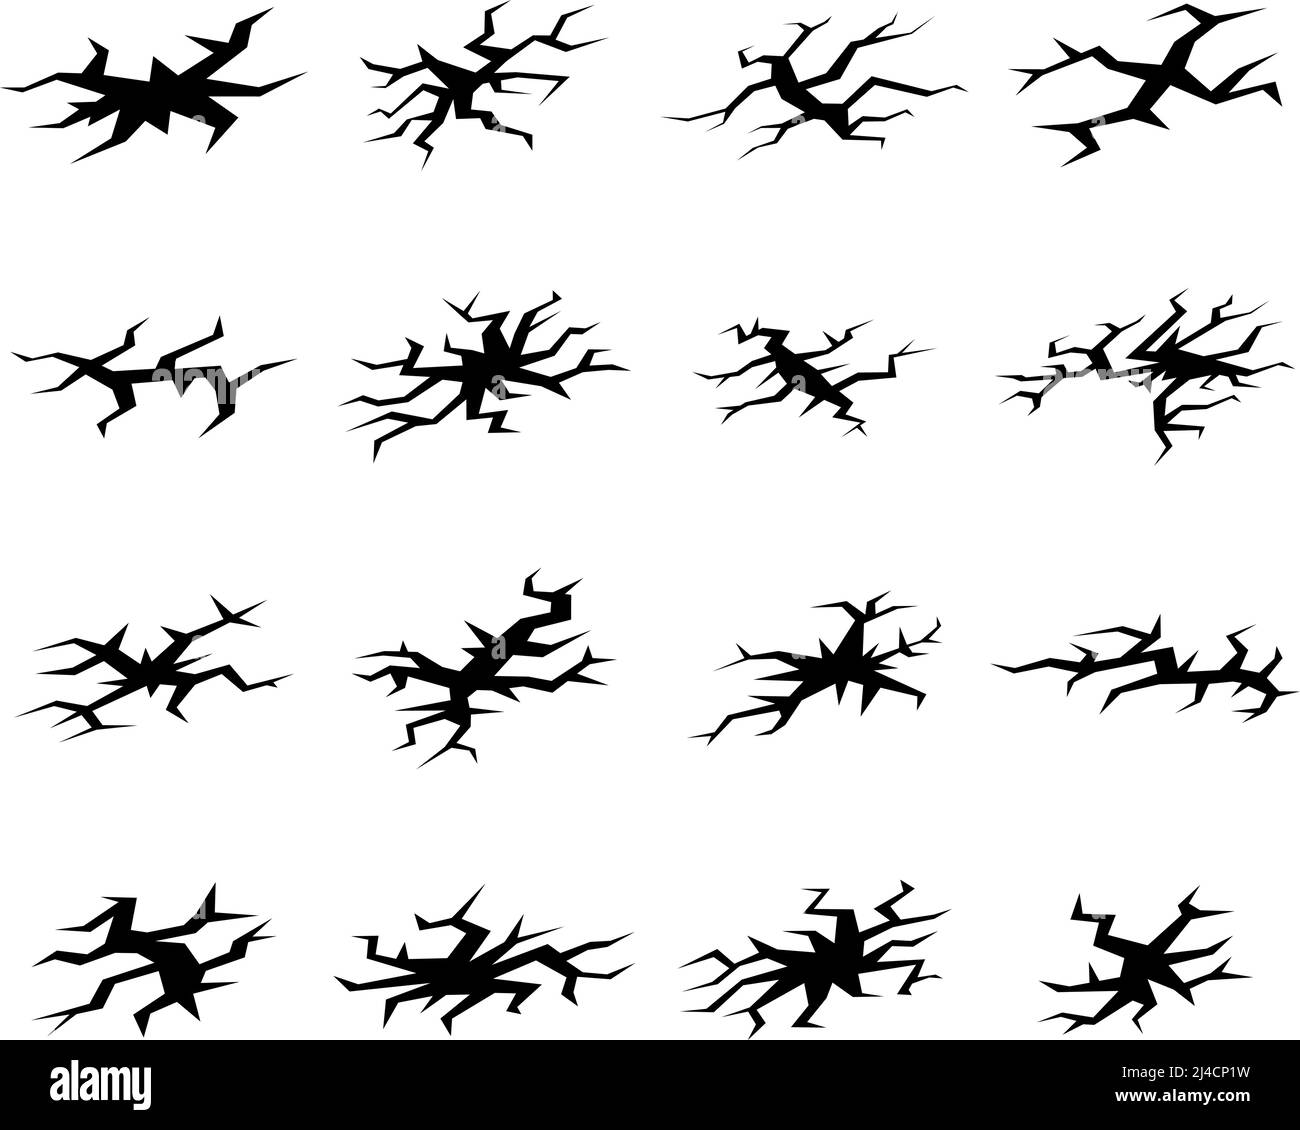 Cracks set. Disaster and damage, grunge art, rough and crash, earthquake and break collapse. Vector illustration Stock Vector